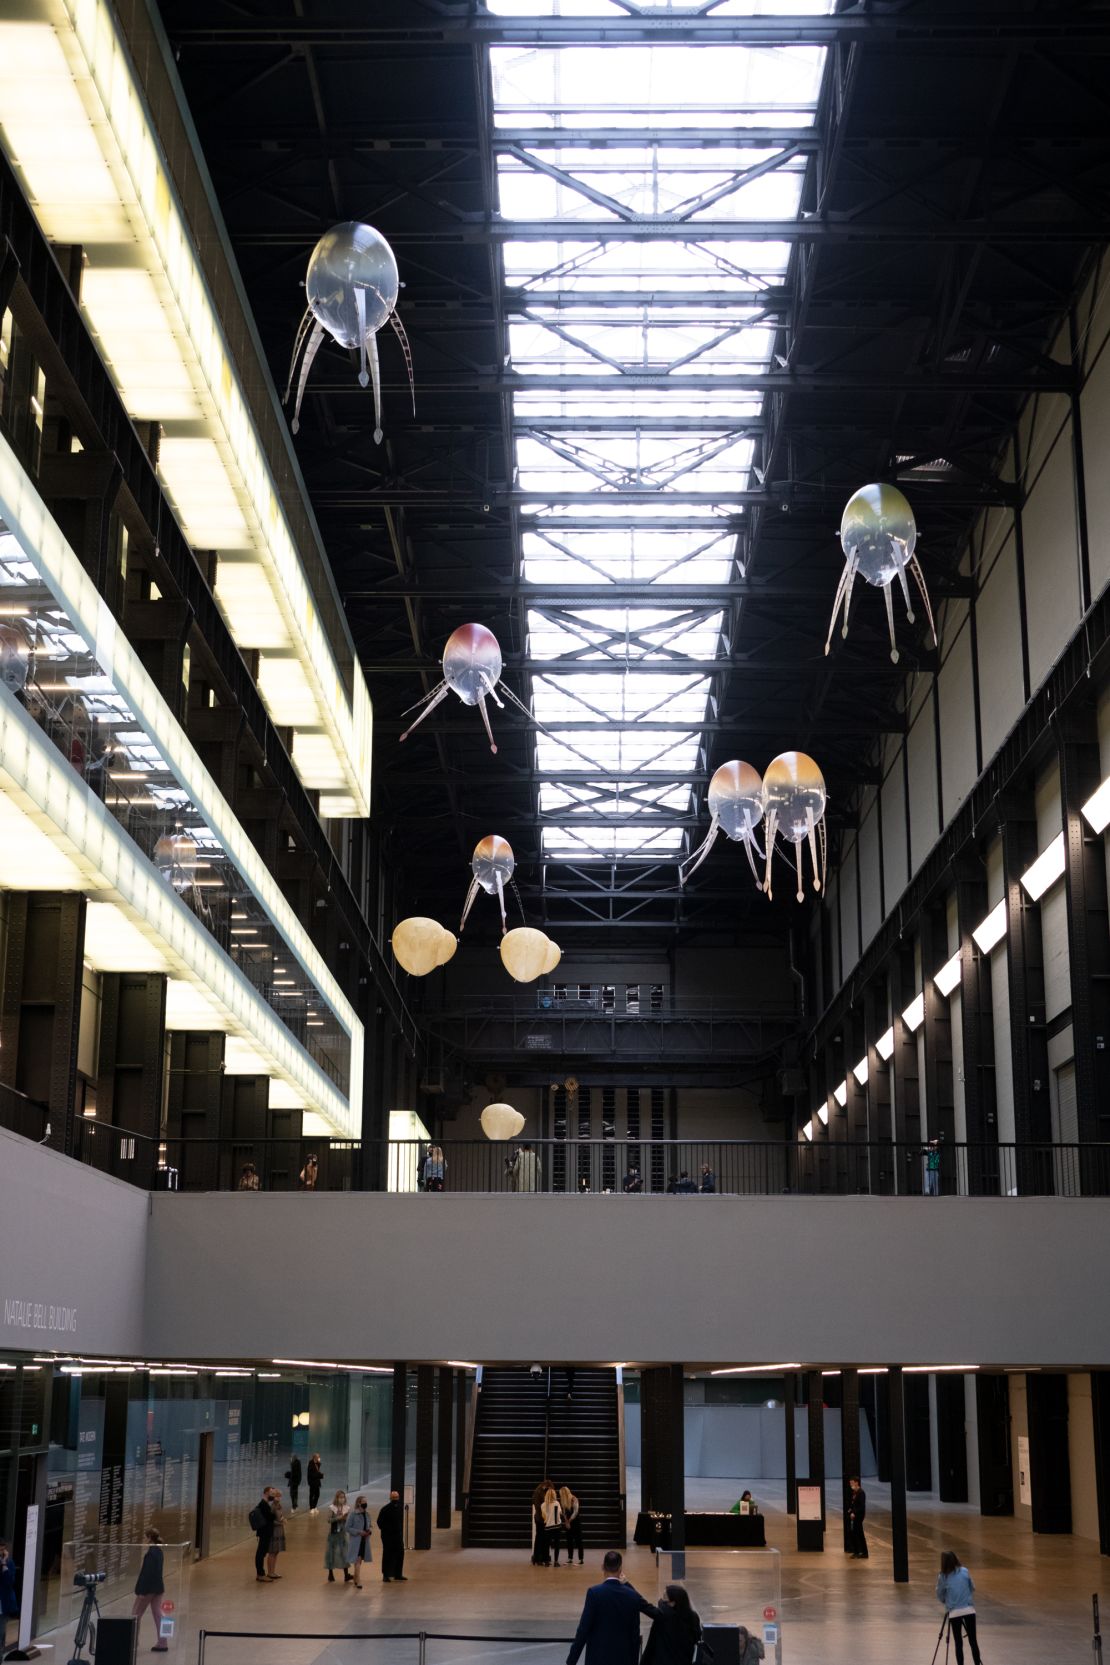 Installation view of "Anicka Yi: In Love With The World" at Tate Modern, London.